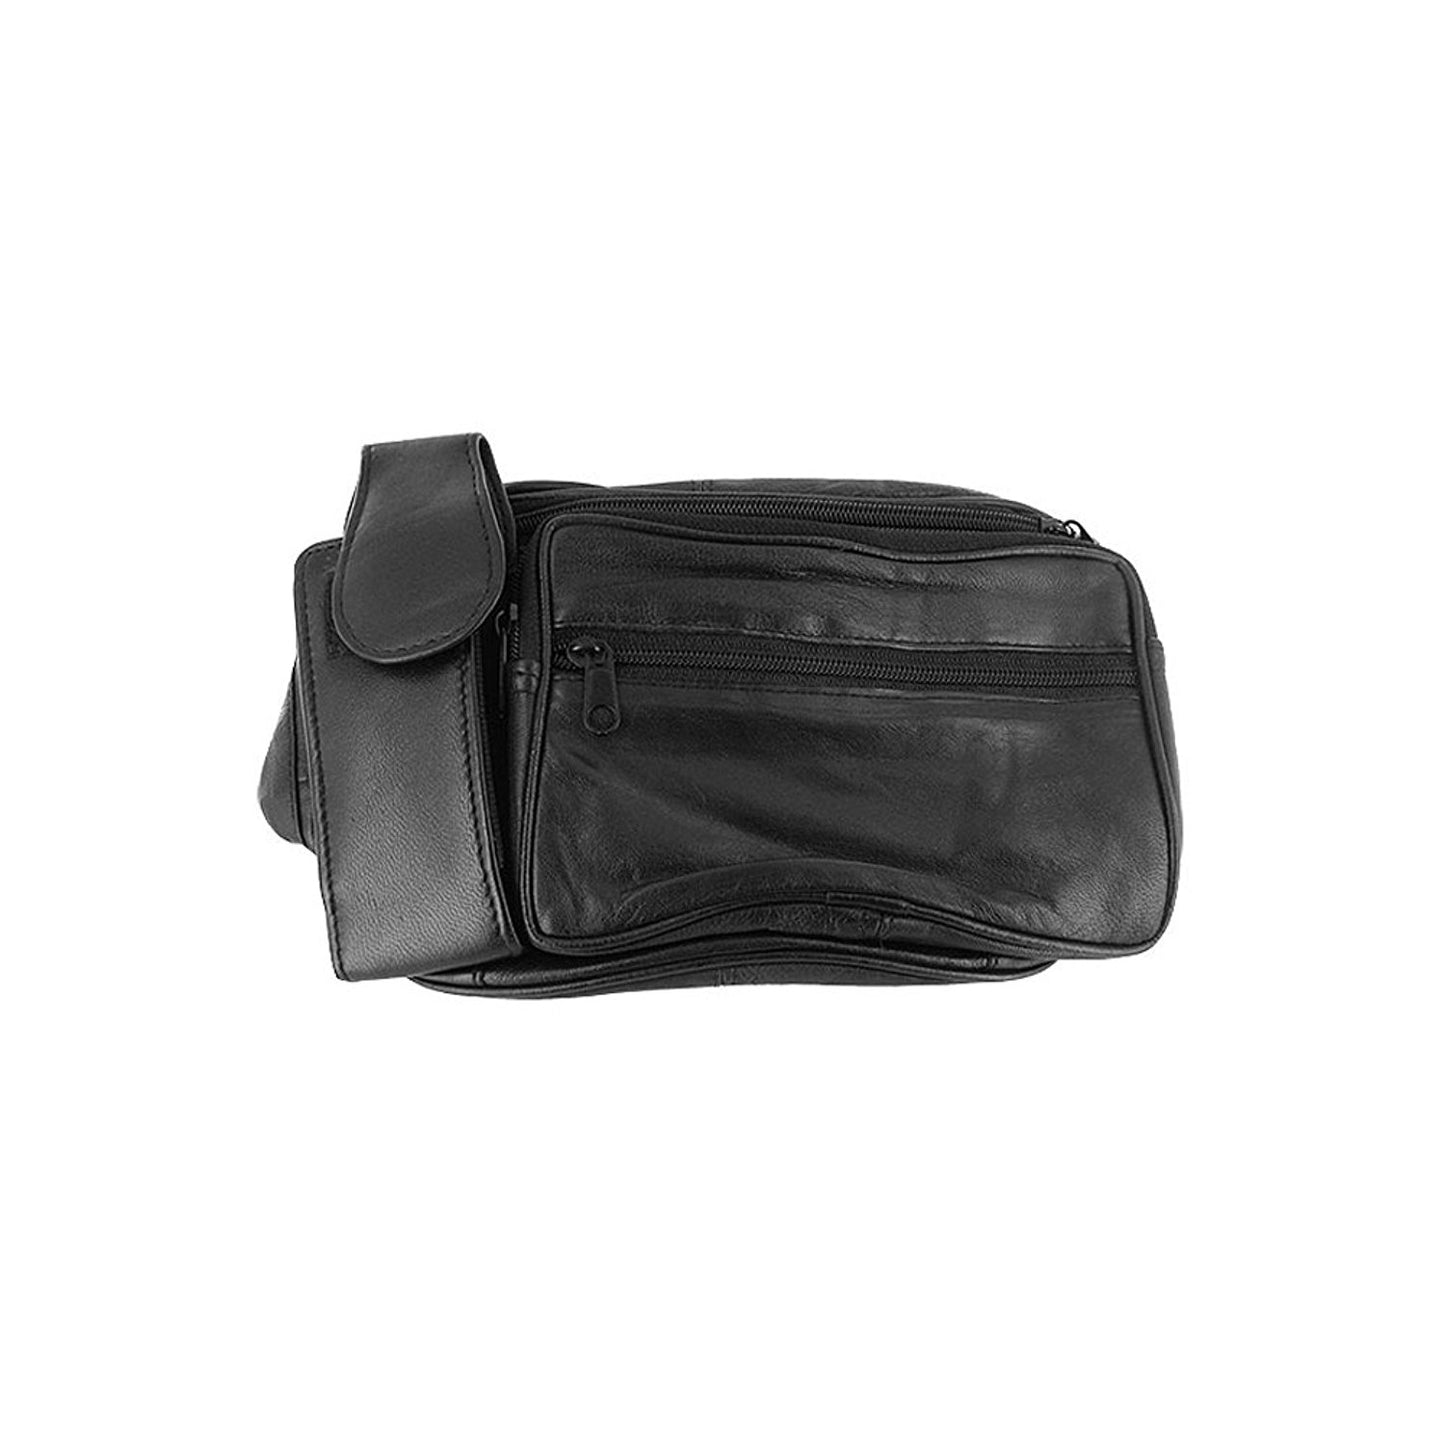 Genuine Leather Black Fanny Pack Waist Bag with Cell Phone Pouch